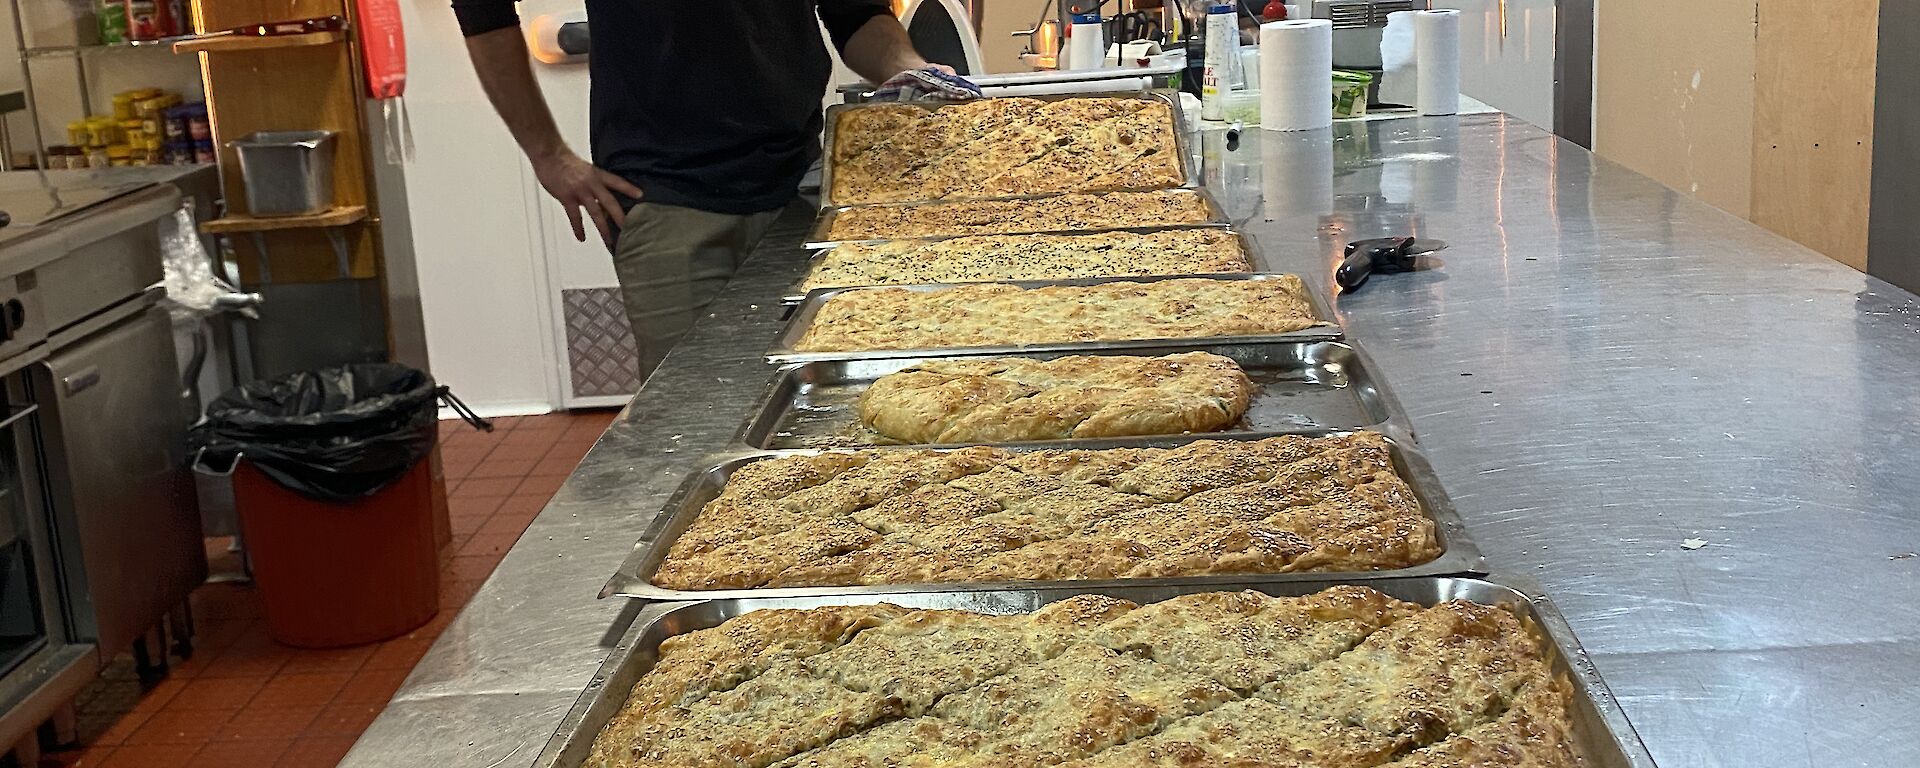 7 trays of fresh made borek on a kitchen bench with an expeditioner smiling to camera